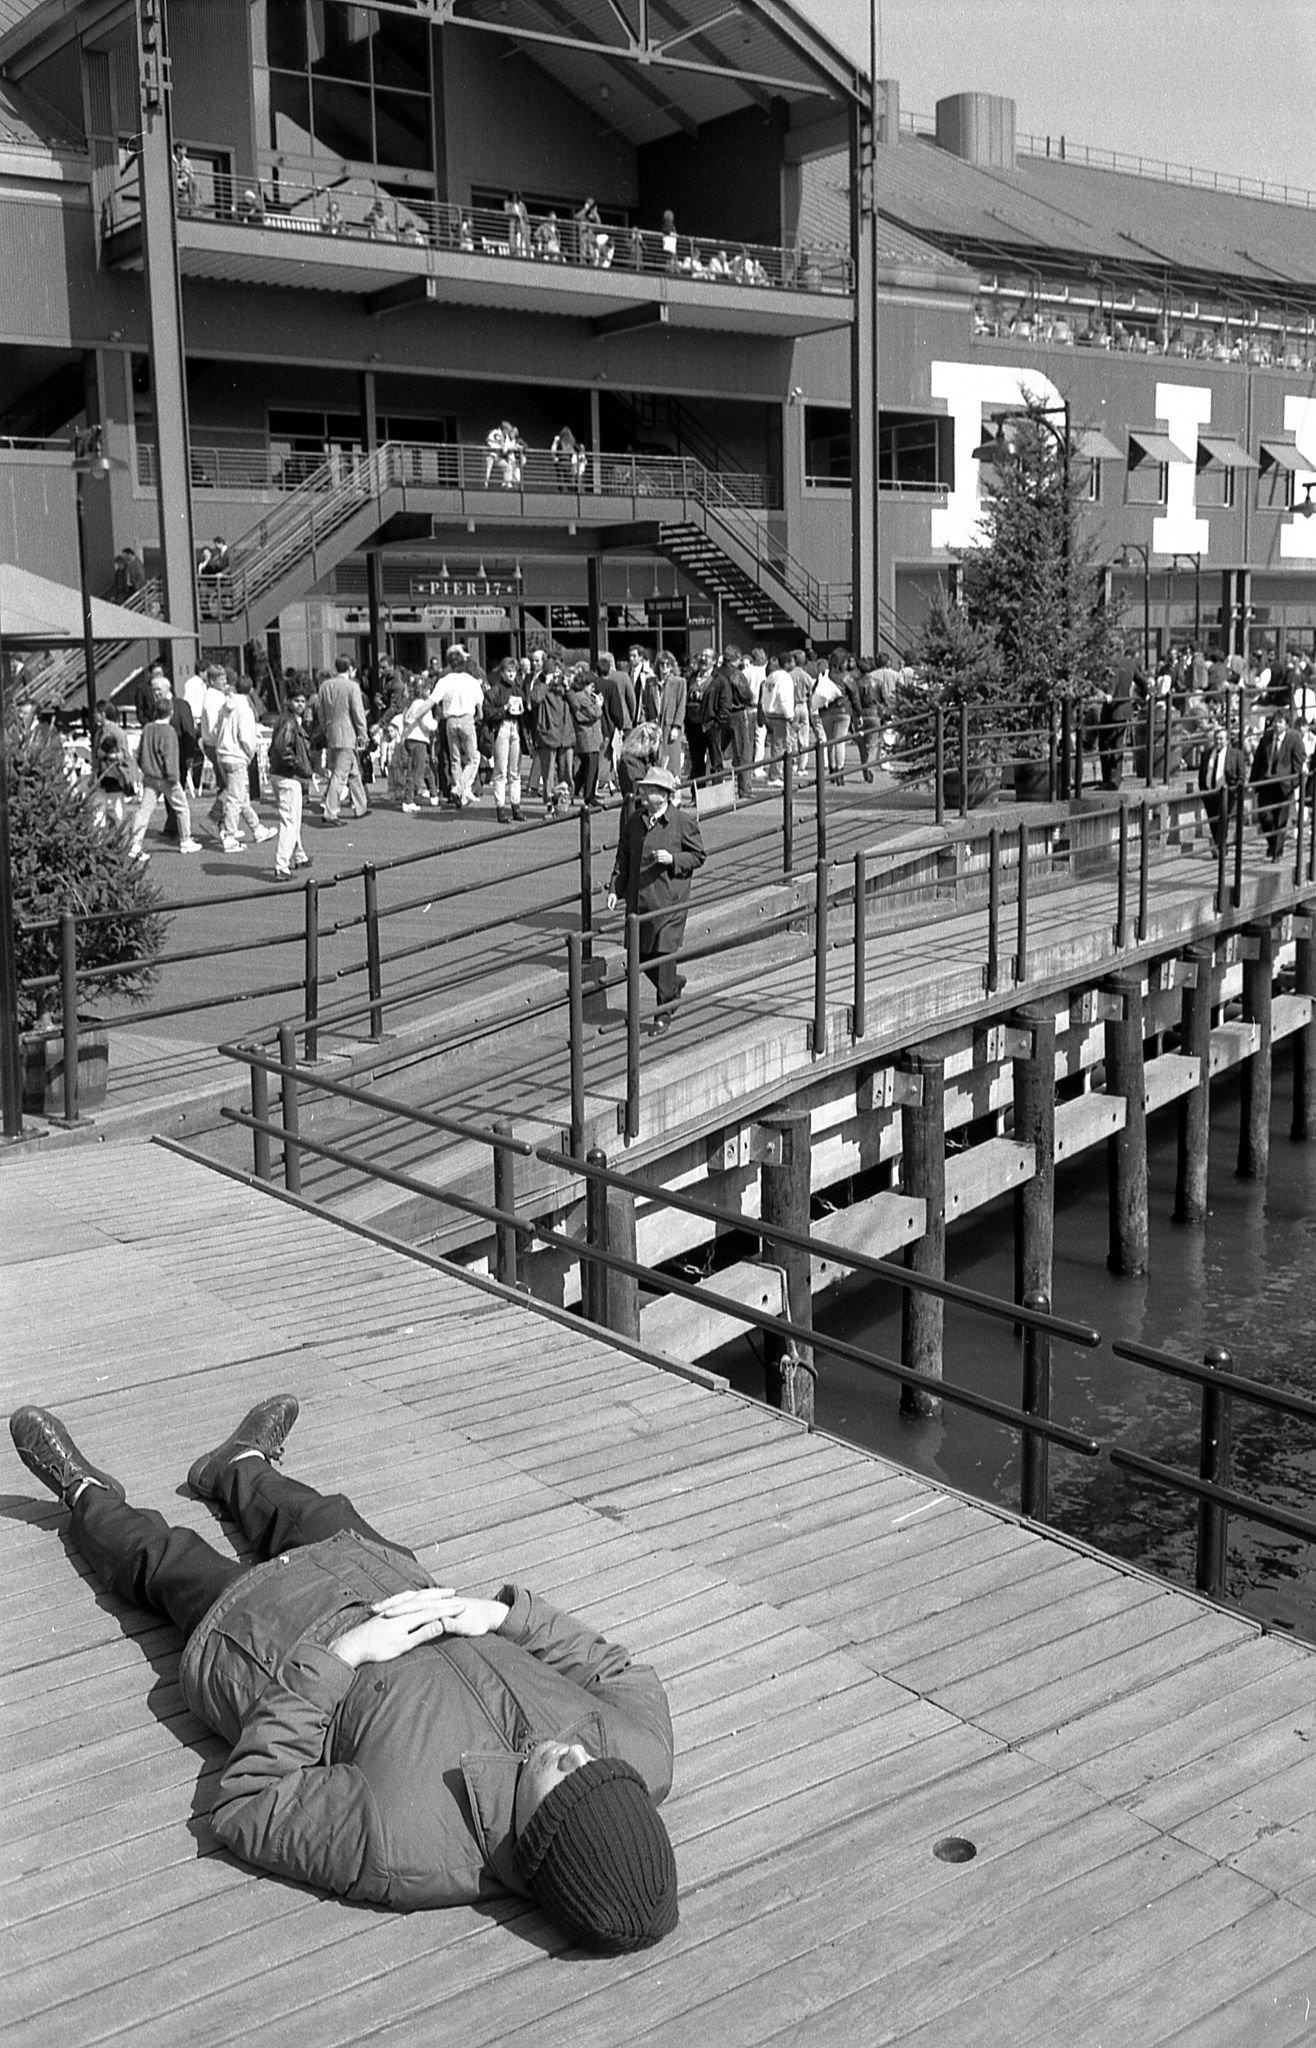 Unidentified Man Taking A Nap At South Street Seaport, Manhattan, 1988